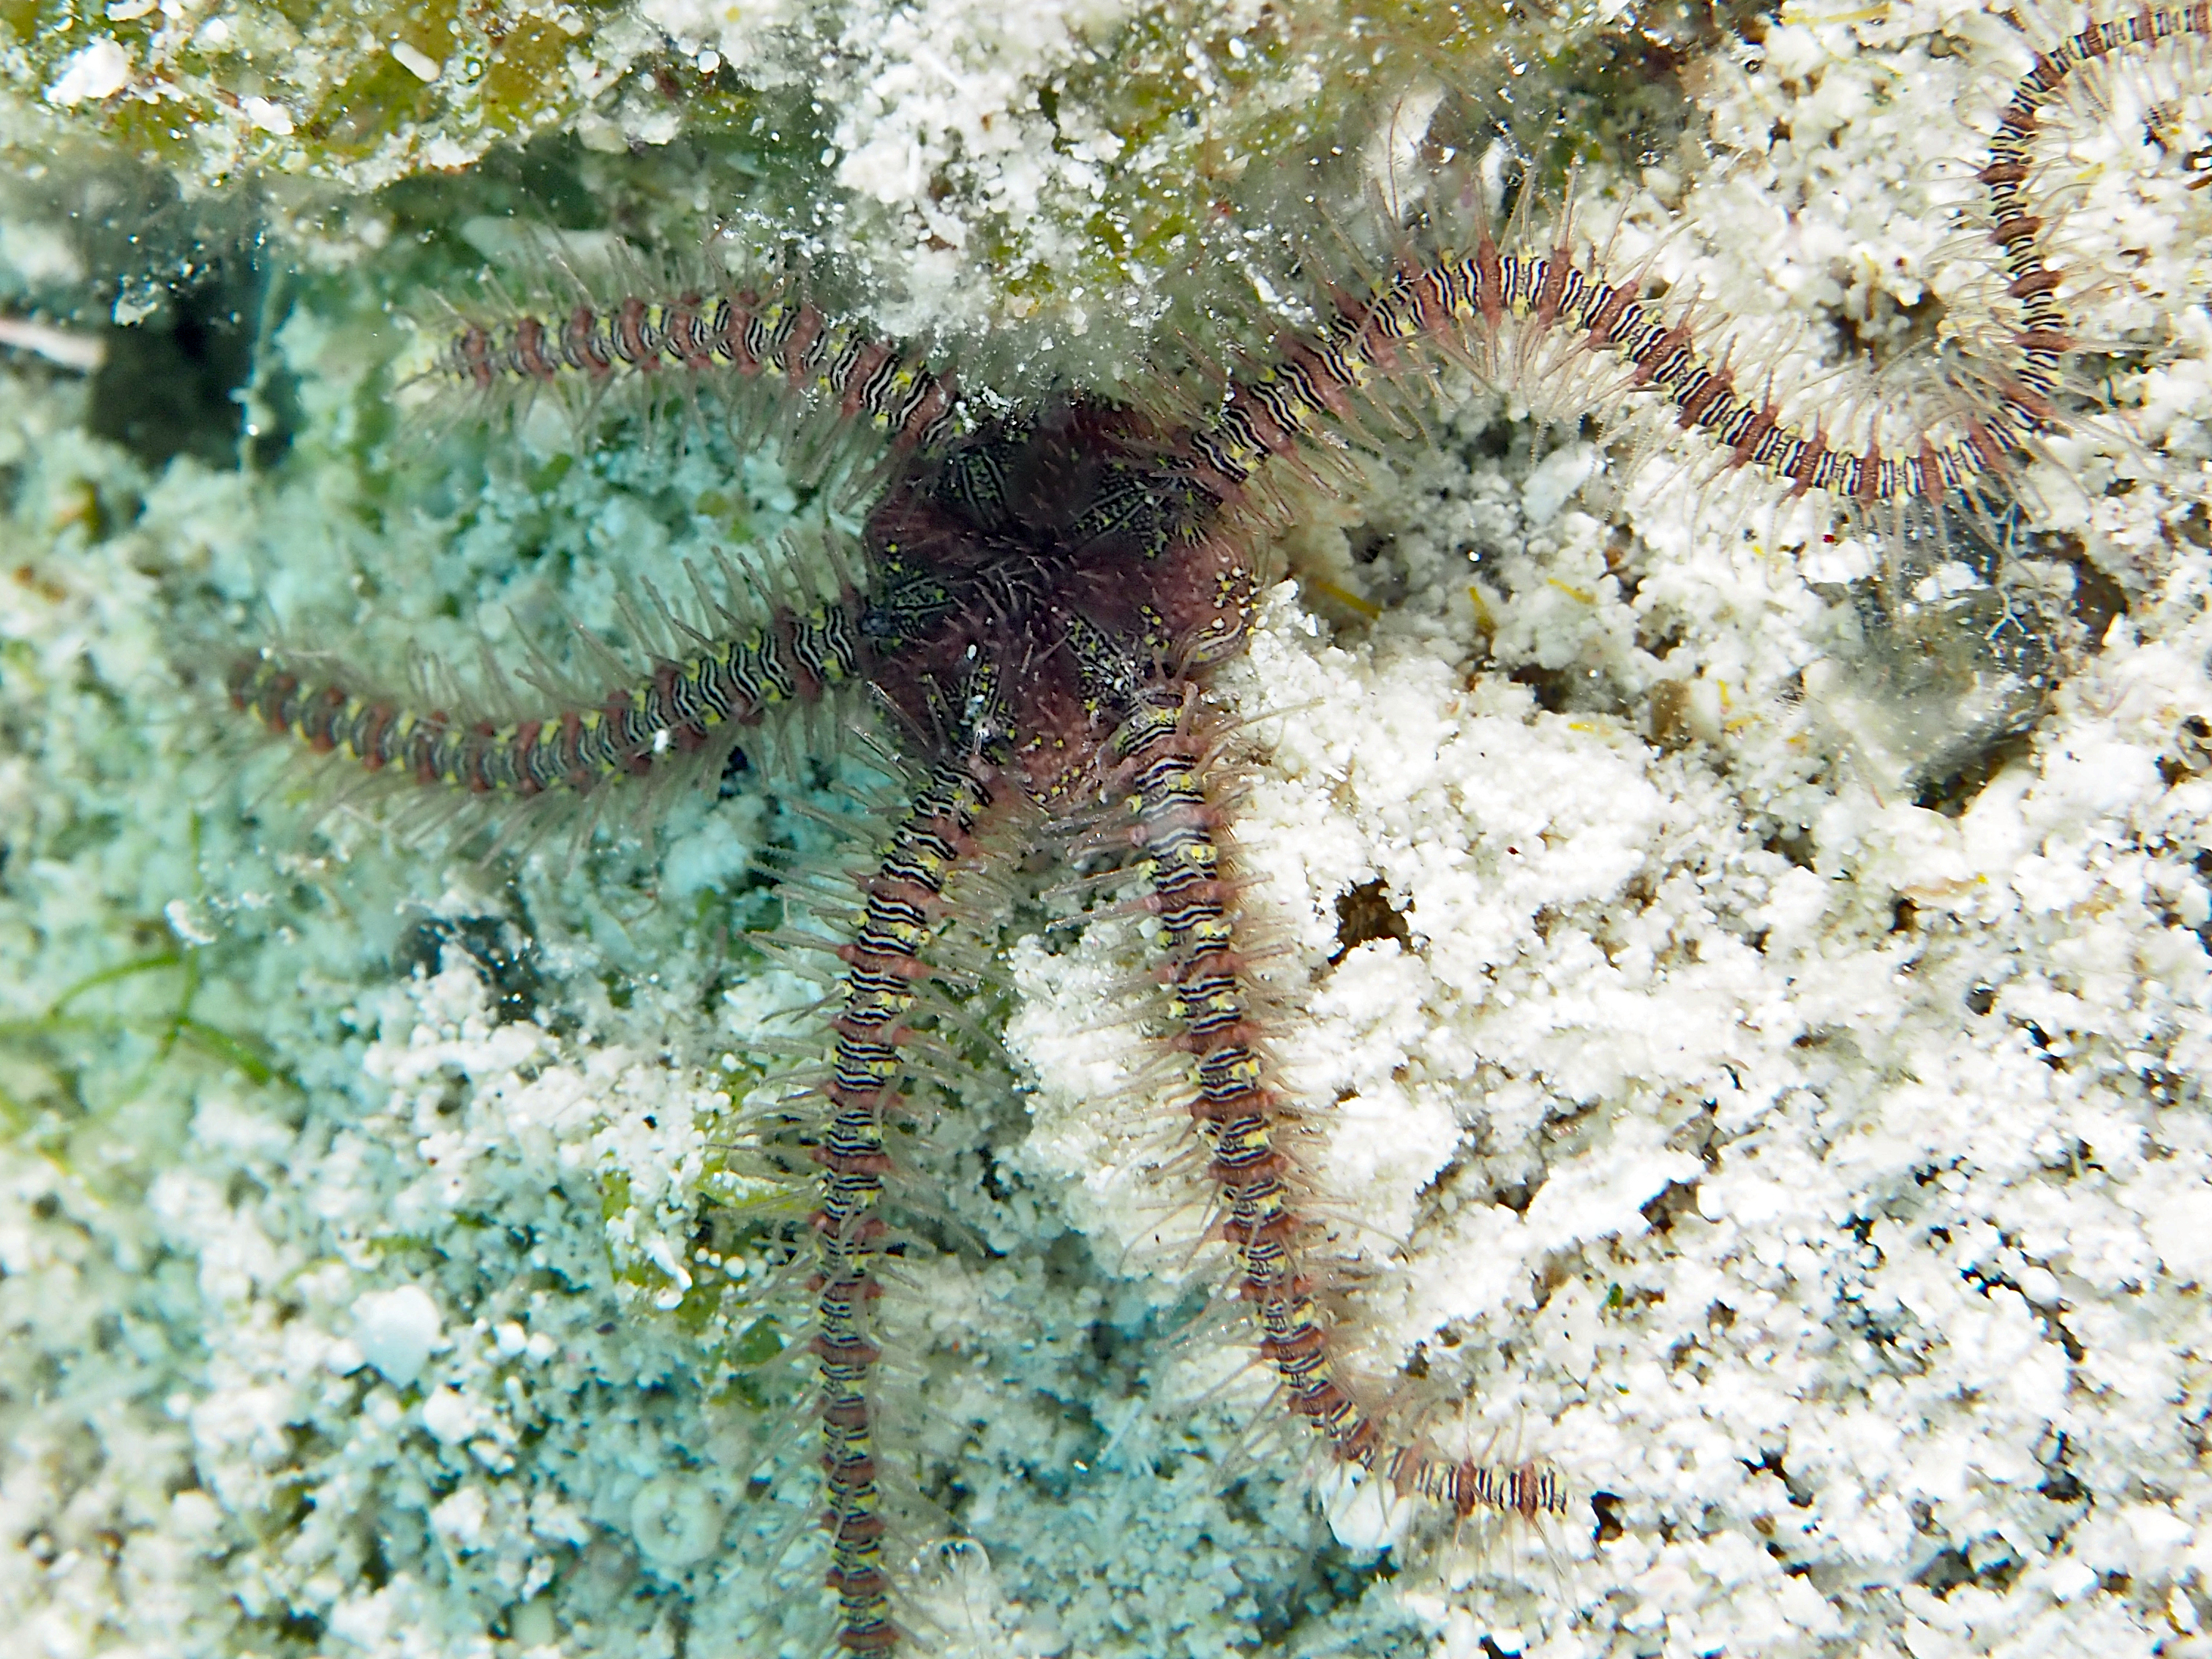 Oersted's Brittle Star - Ophiothrix oerstedii - Turks and Caicos